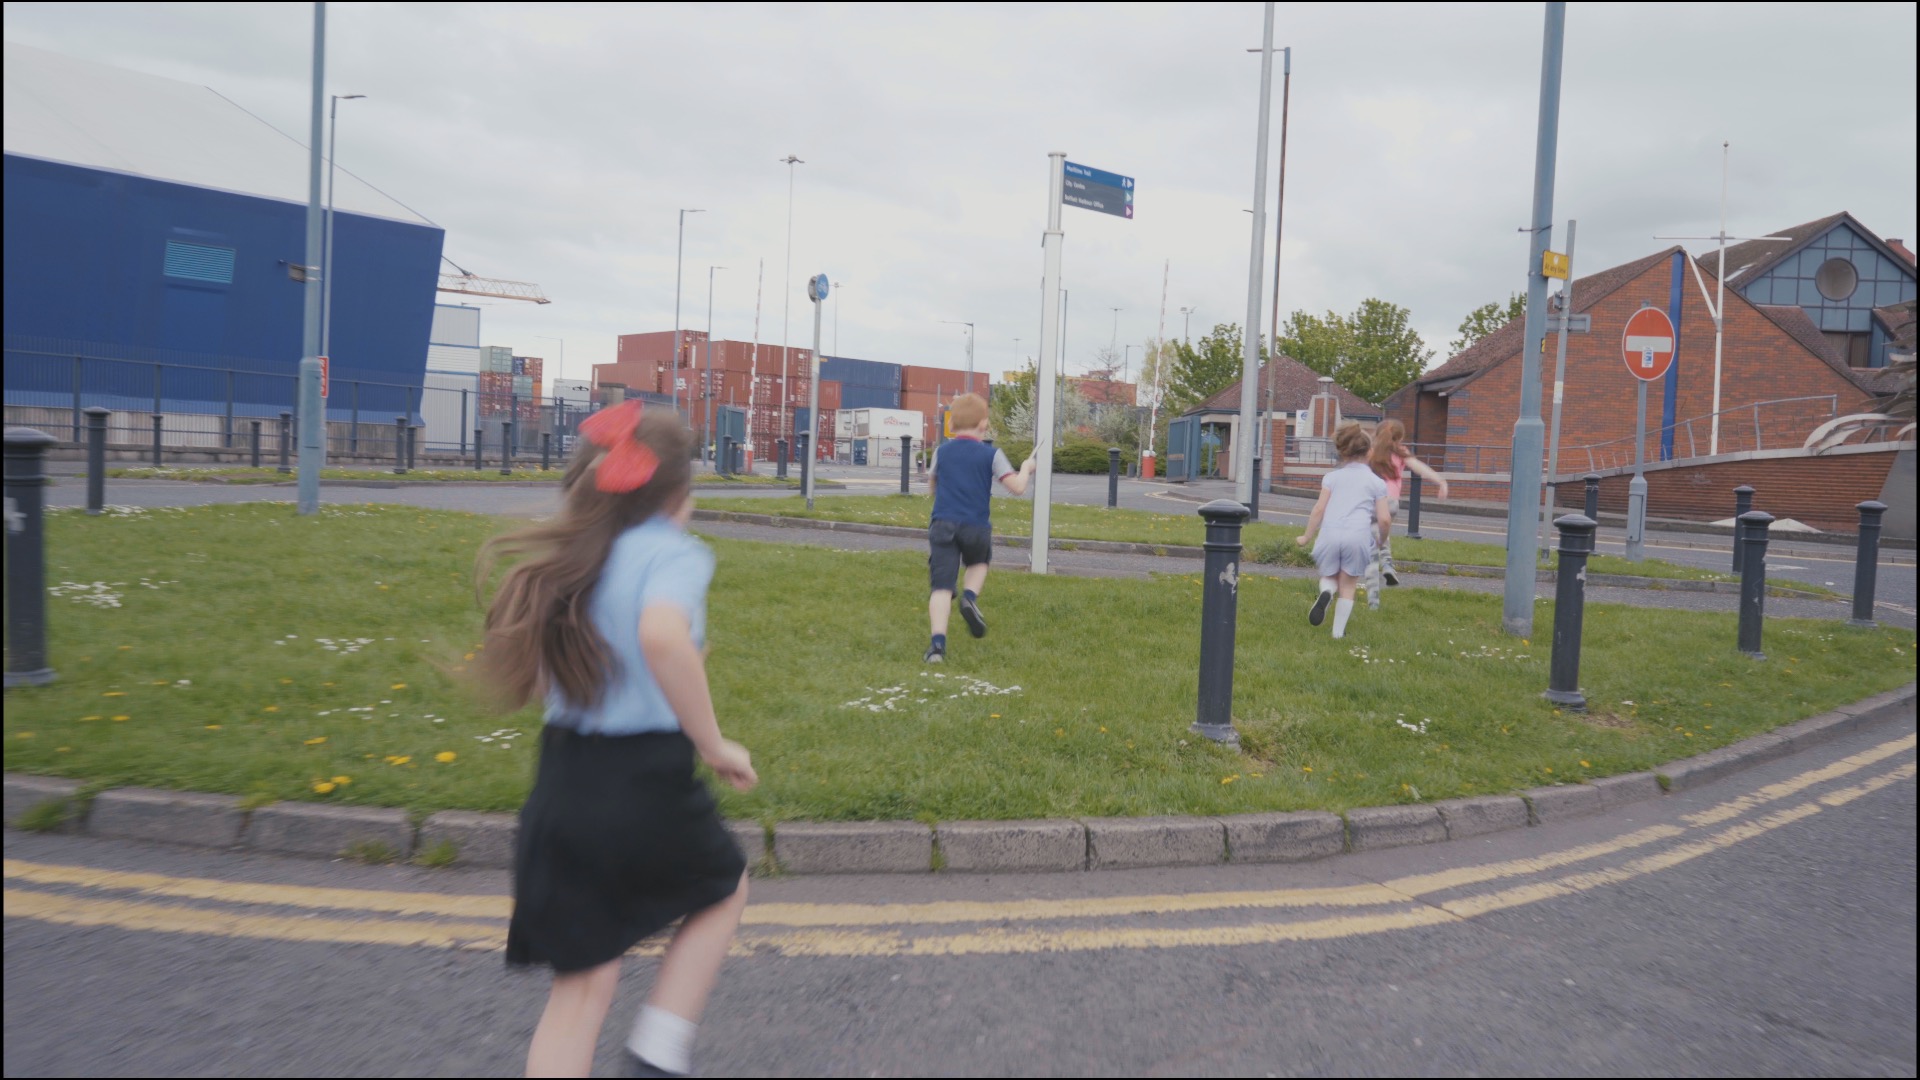 Sol Archer, The Production of Daily Life, long term residency project, Sailortown